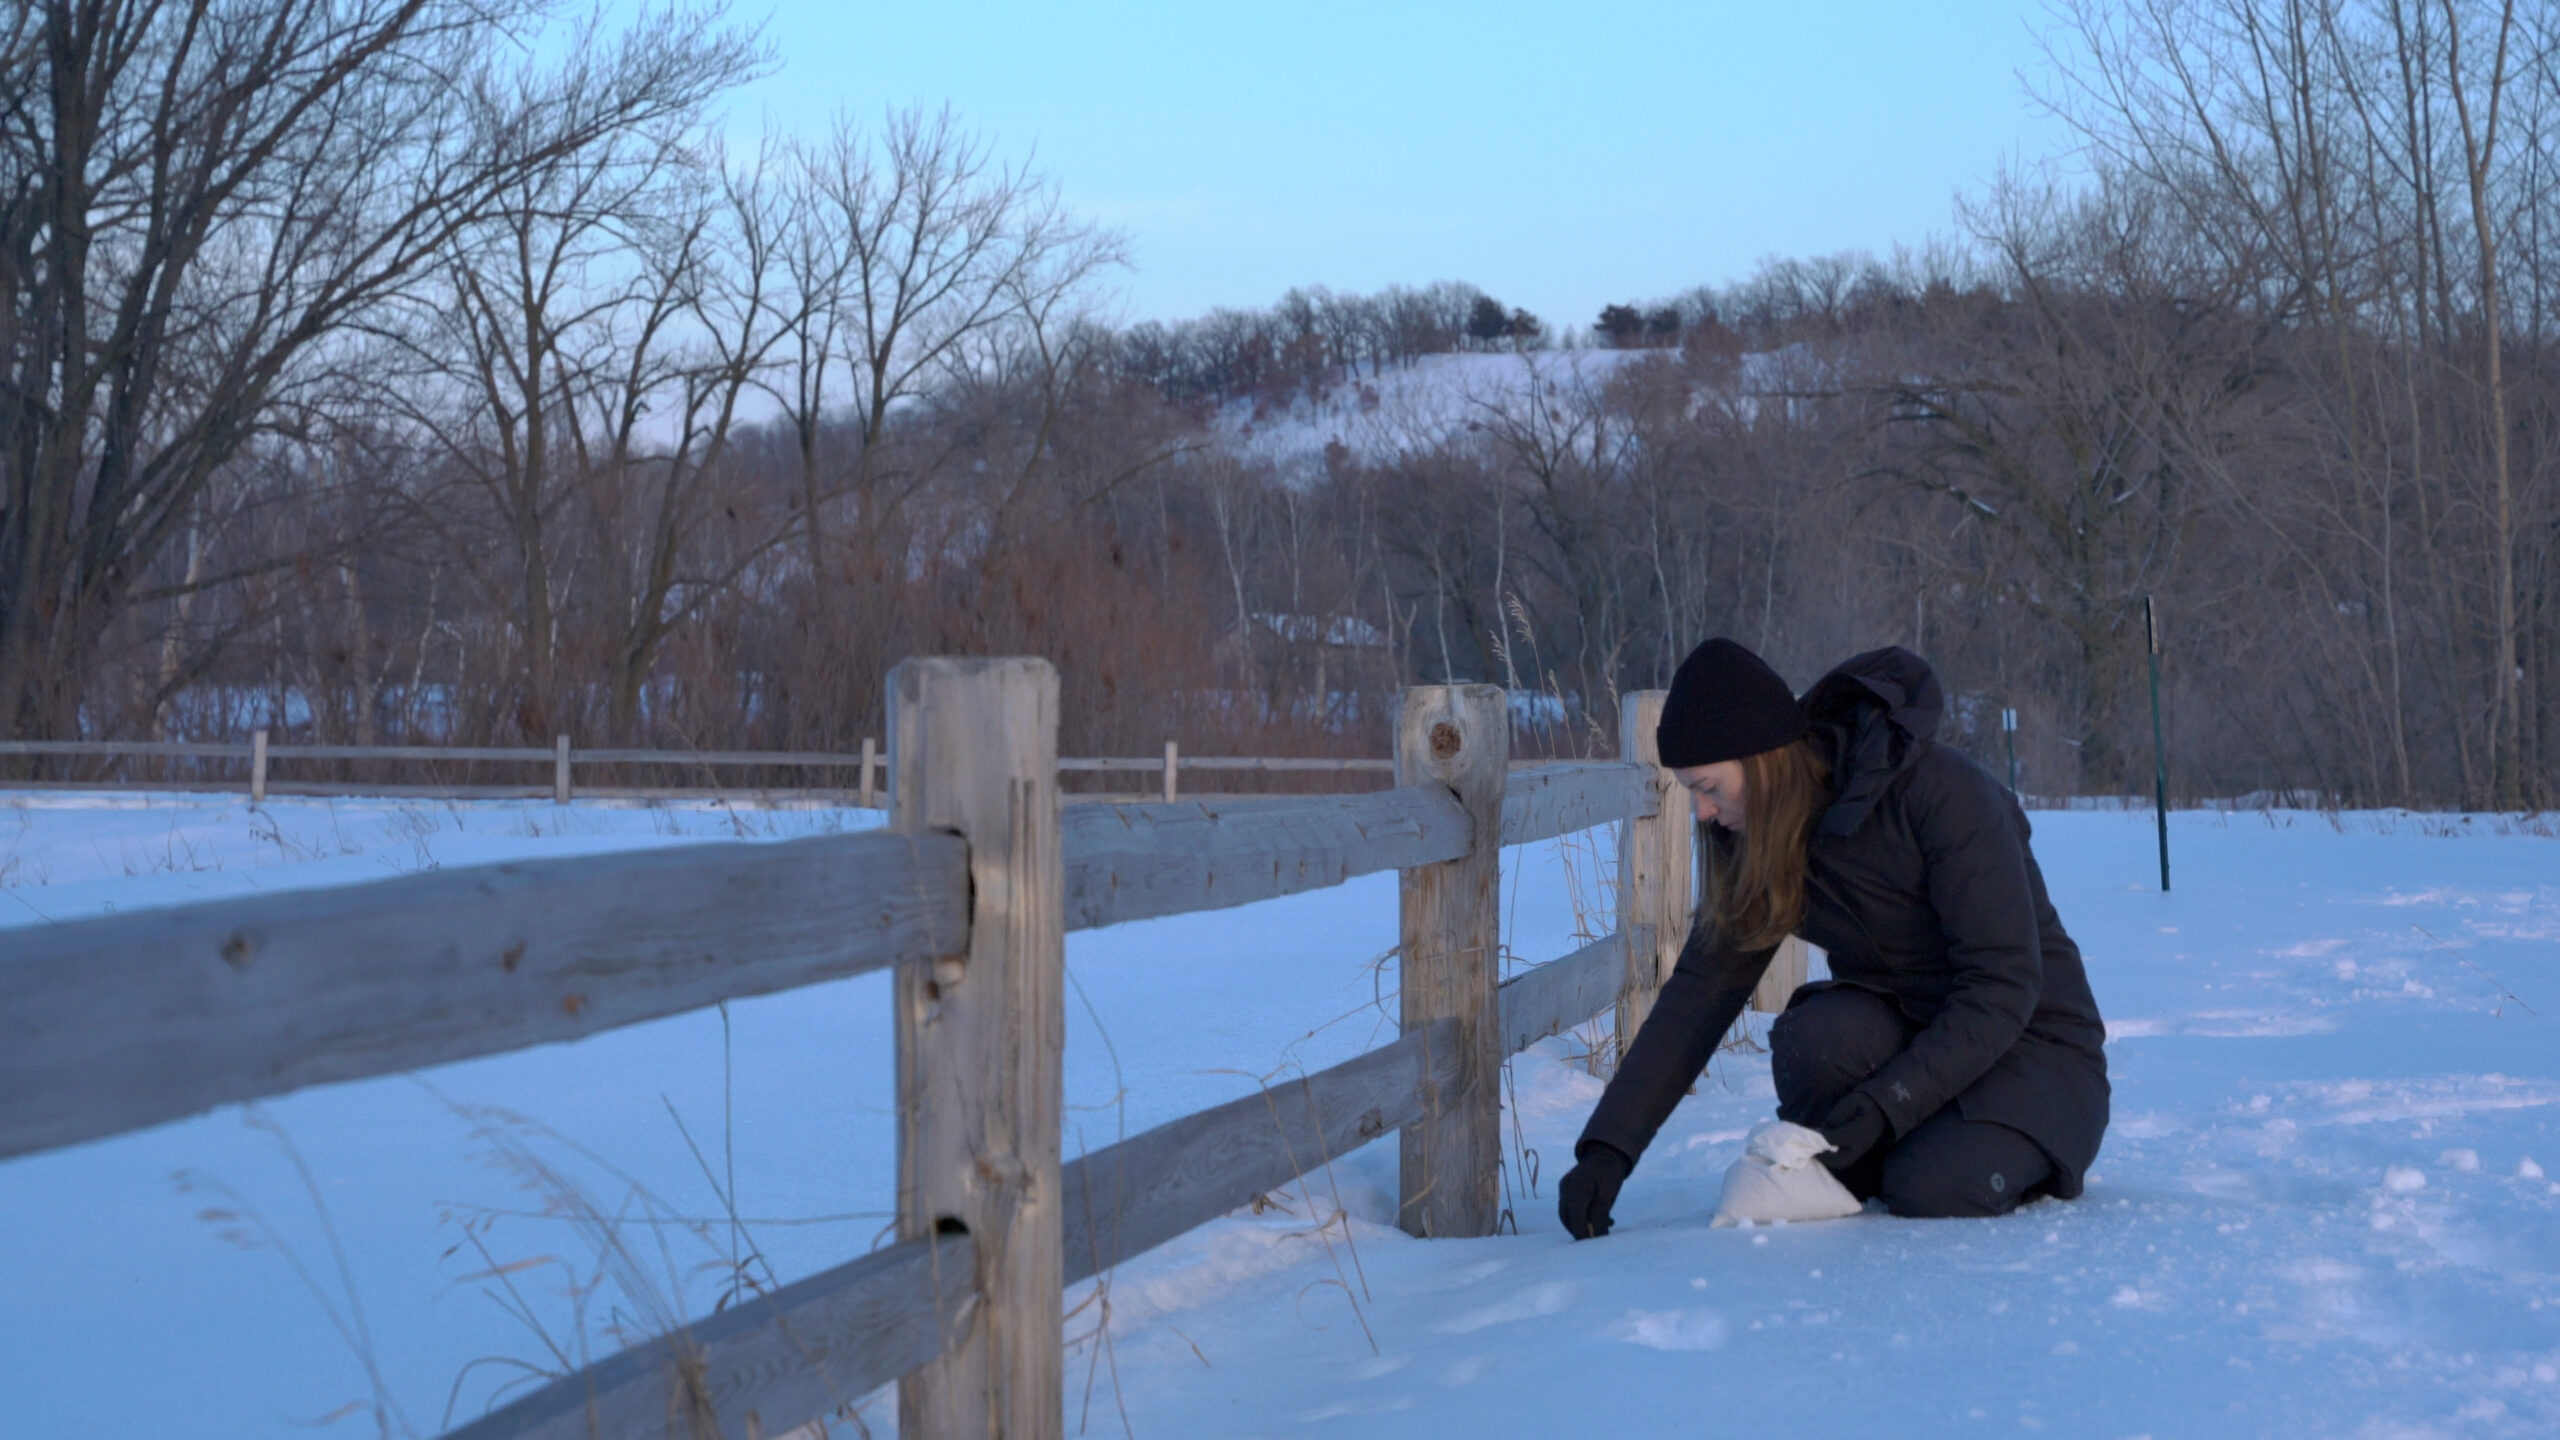 Person in winter coat kneels on ground in field of snow in front of wooden fence.